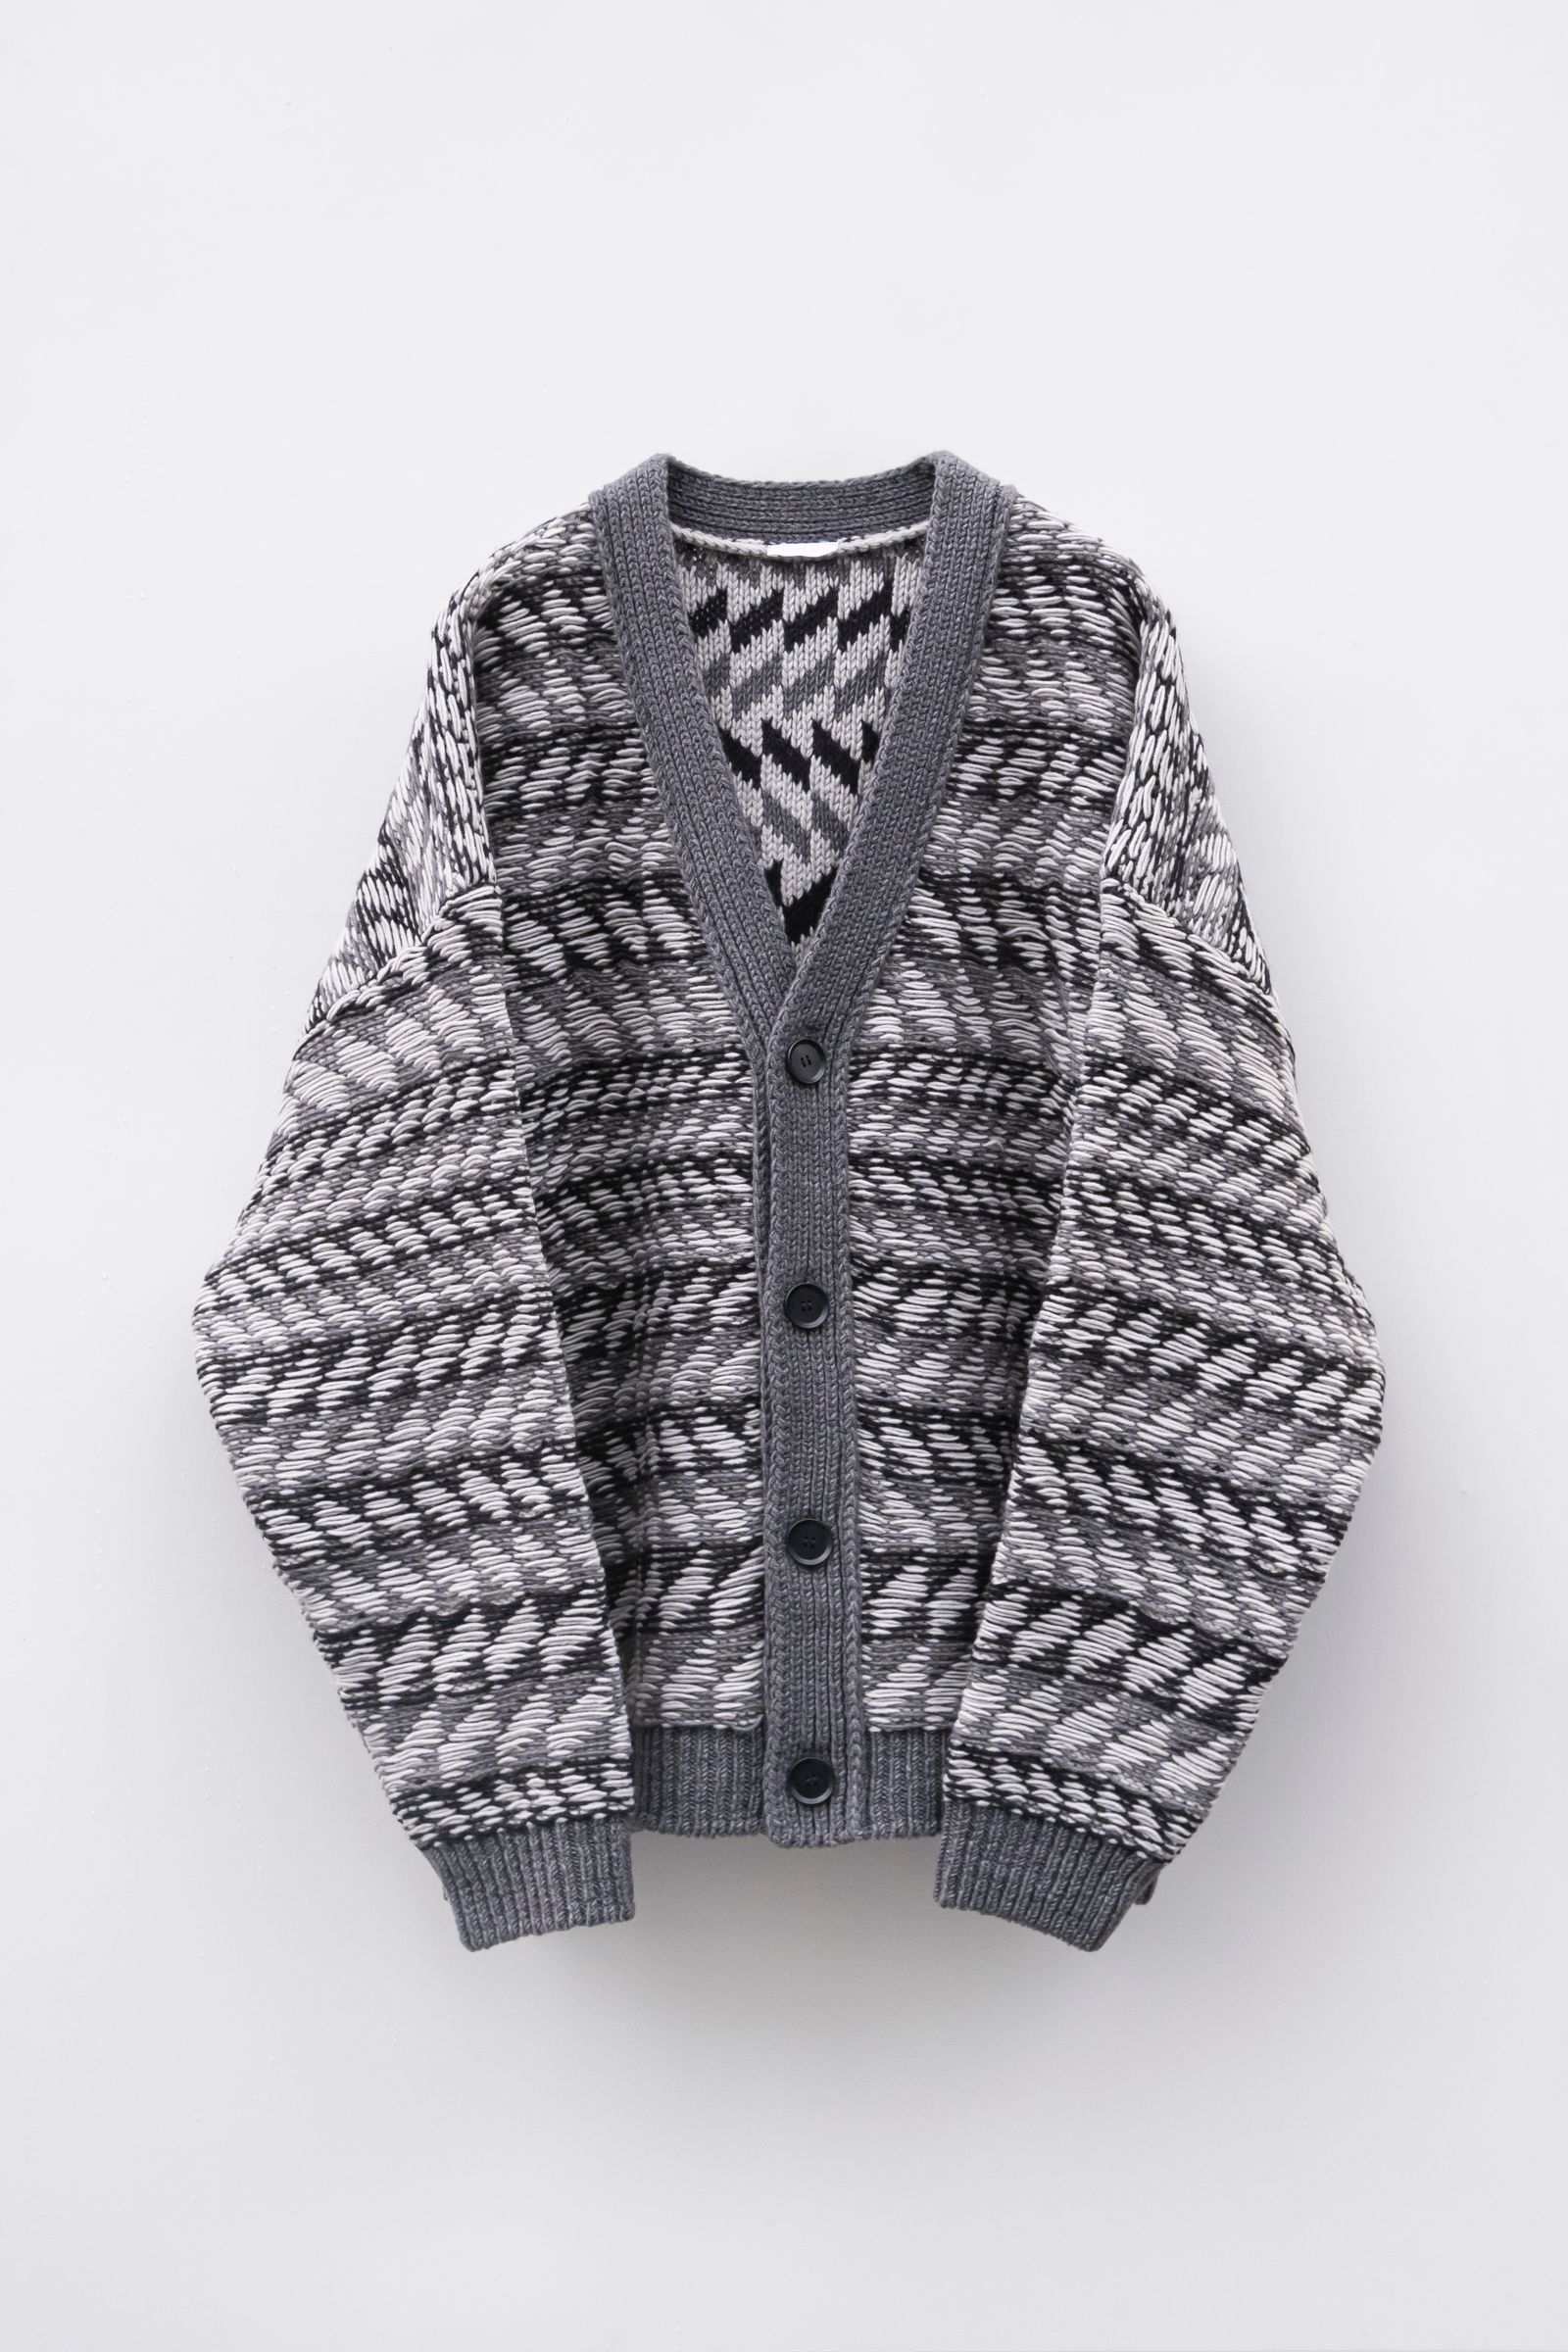 Blanc YM - Inside out knit JKT / Gray | Retikle Online Store